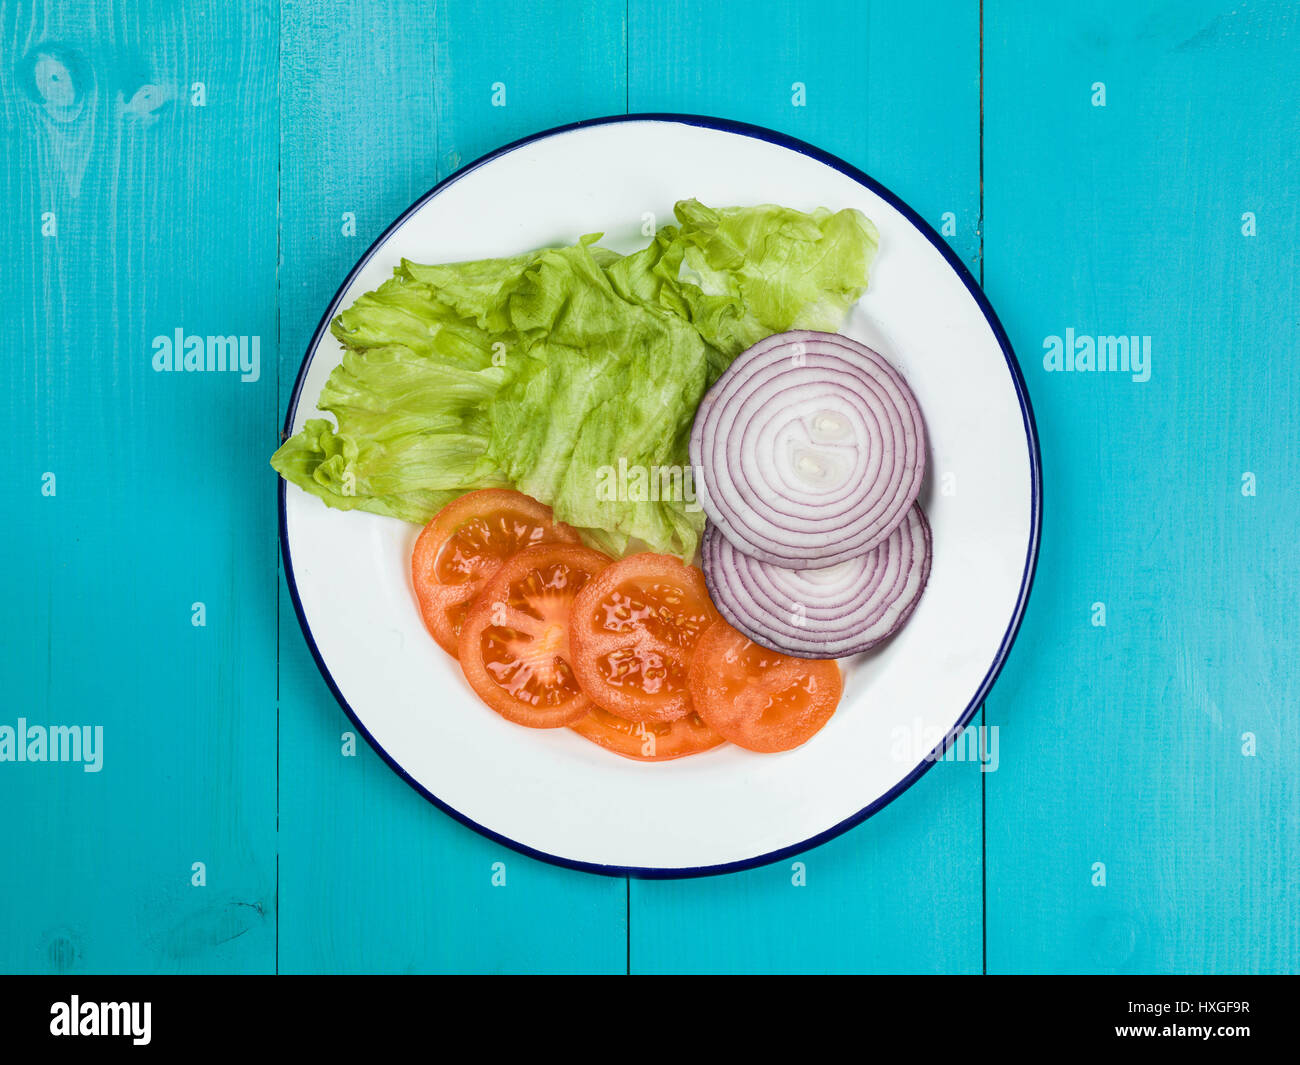 Fresh Garden Salad Tomato Onion and Lettuce Against a Blue Background Stock Photo